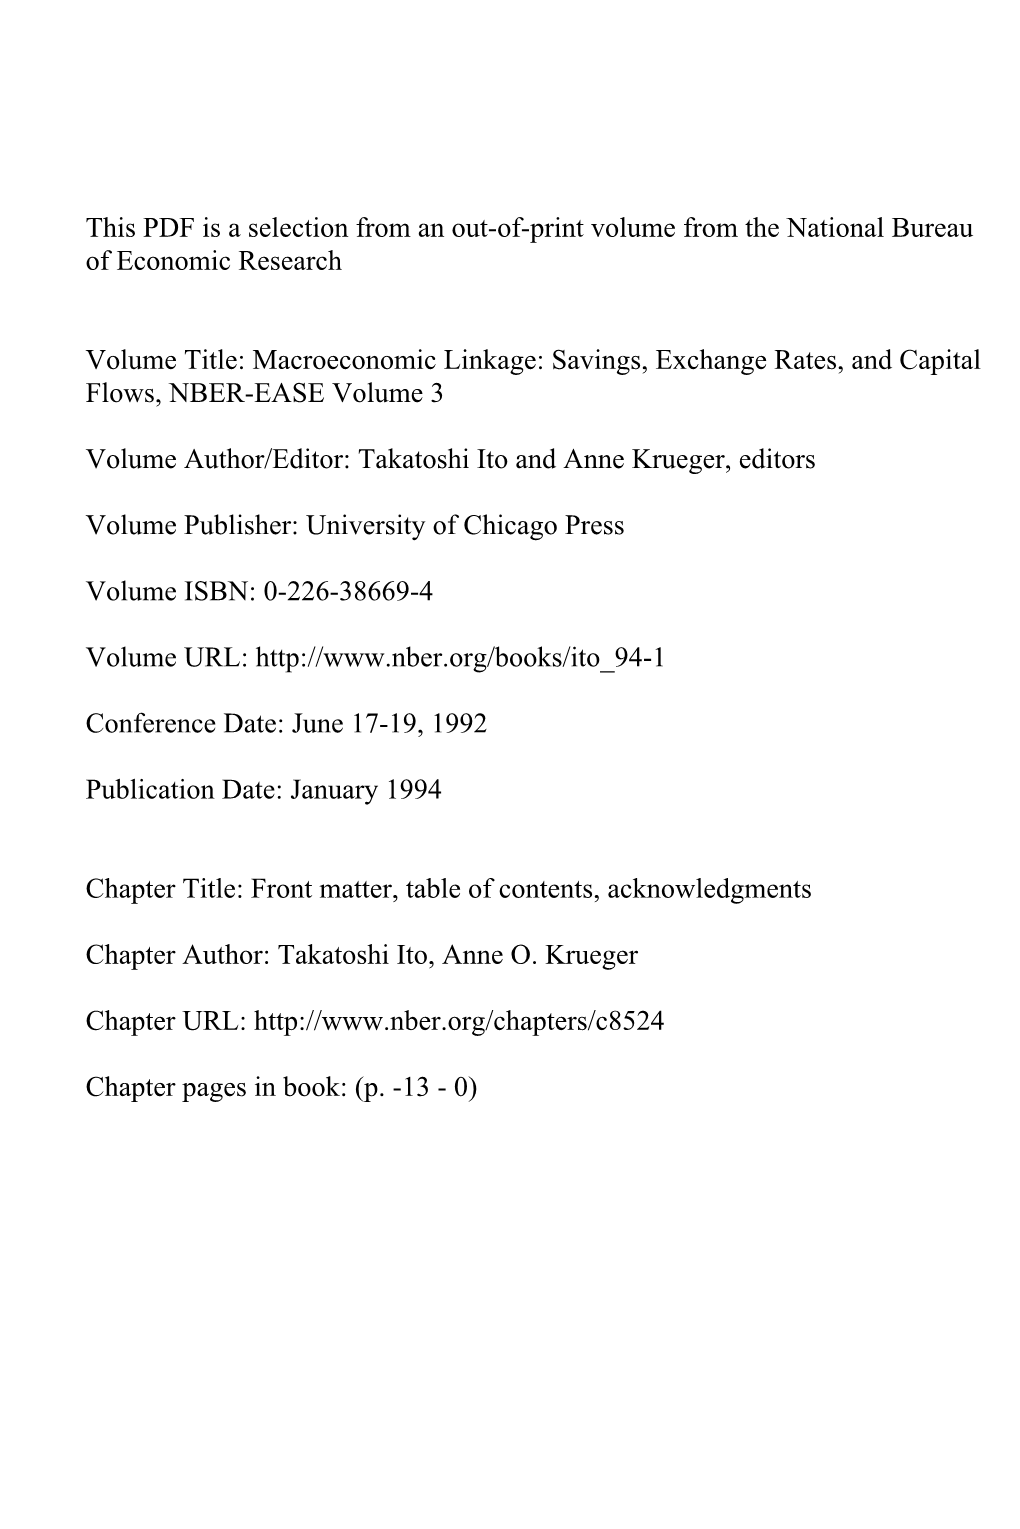 Front Matter, Table of Contents, Acknowledgments